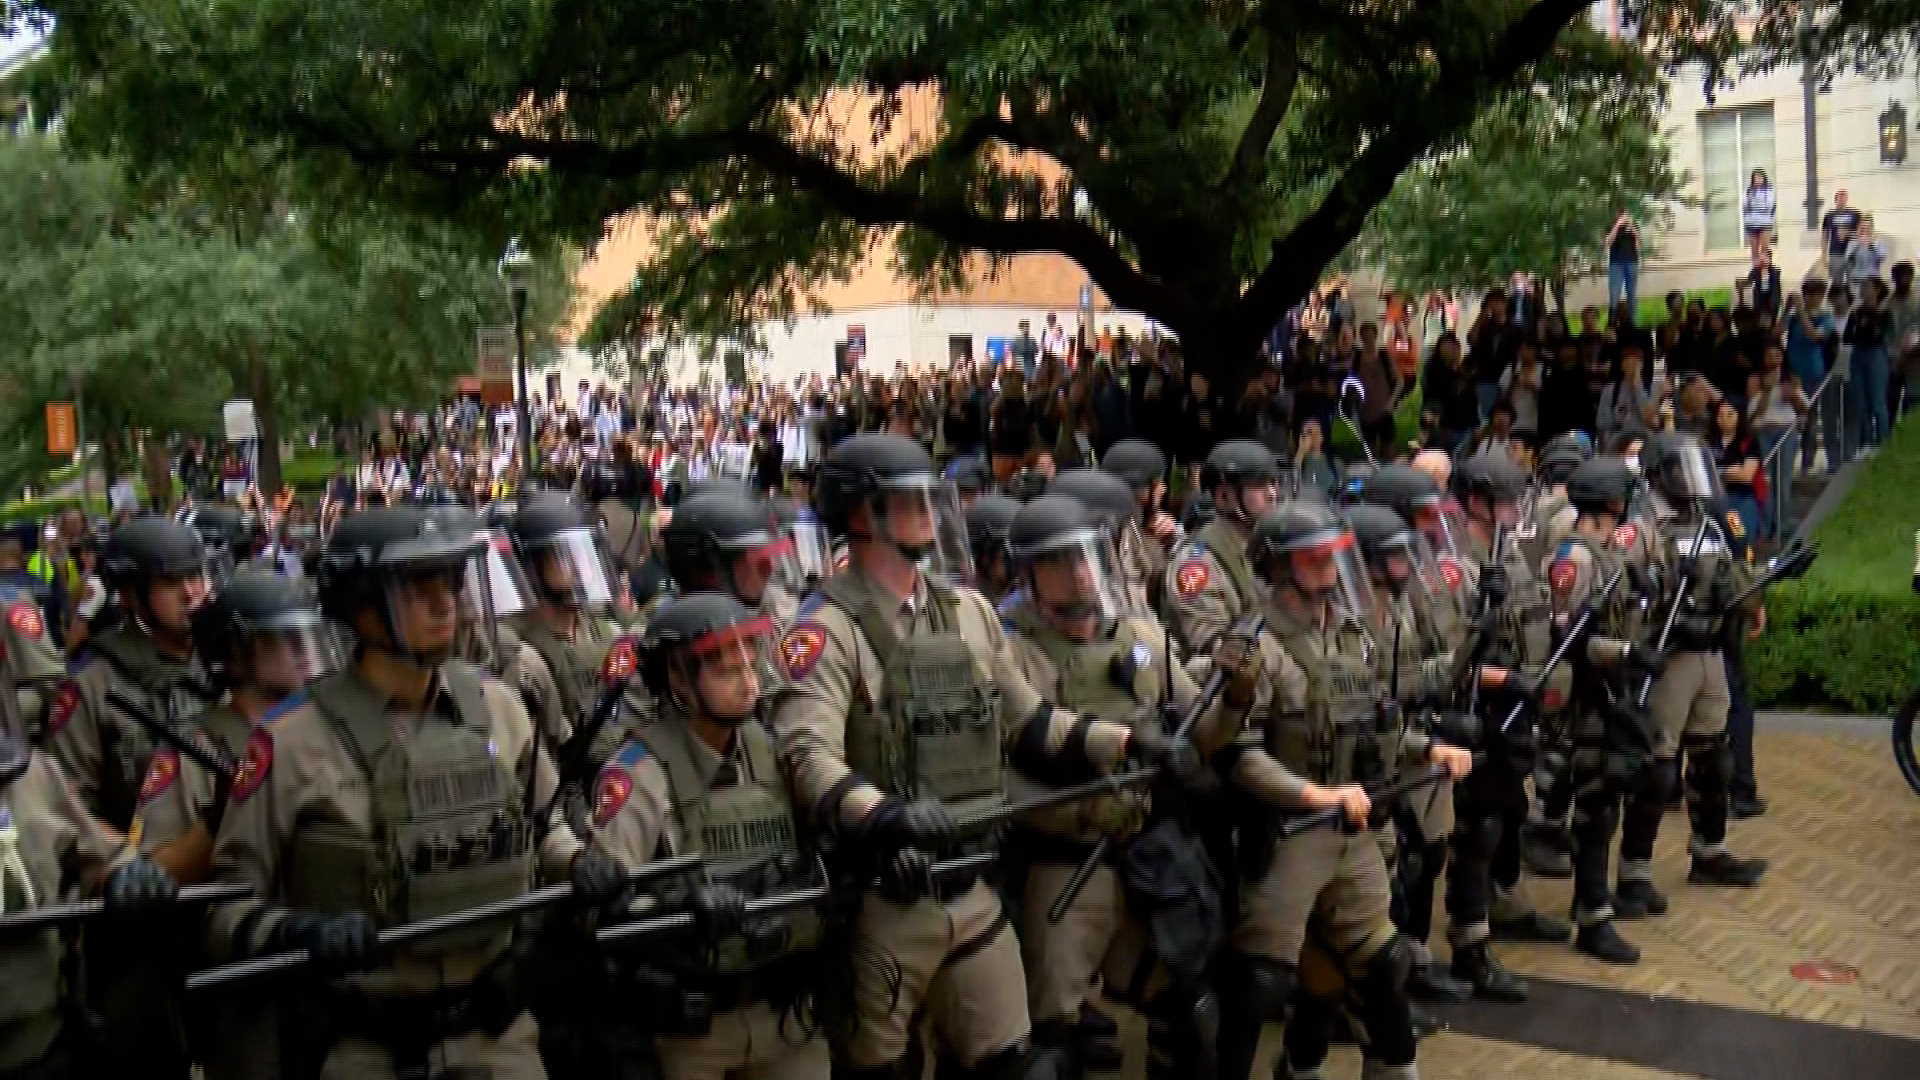 State troopers are seen at University of Texas in Austin, as Pro-Palestinian protests broke out on April 24.